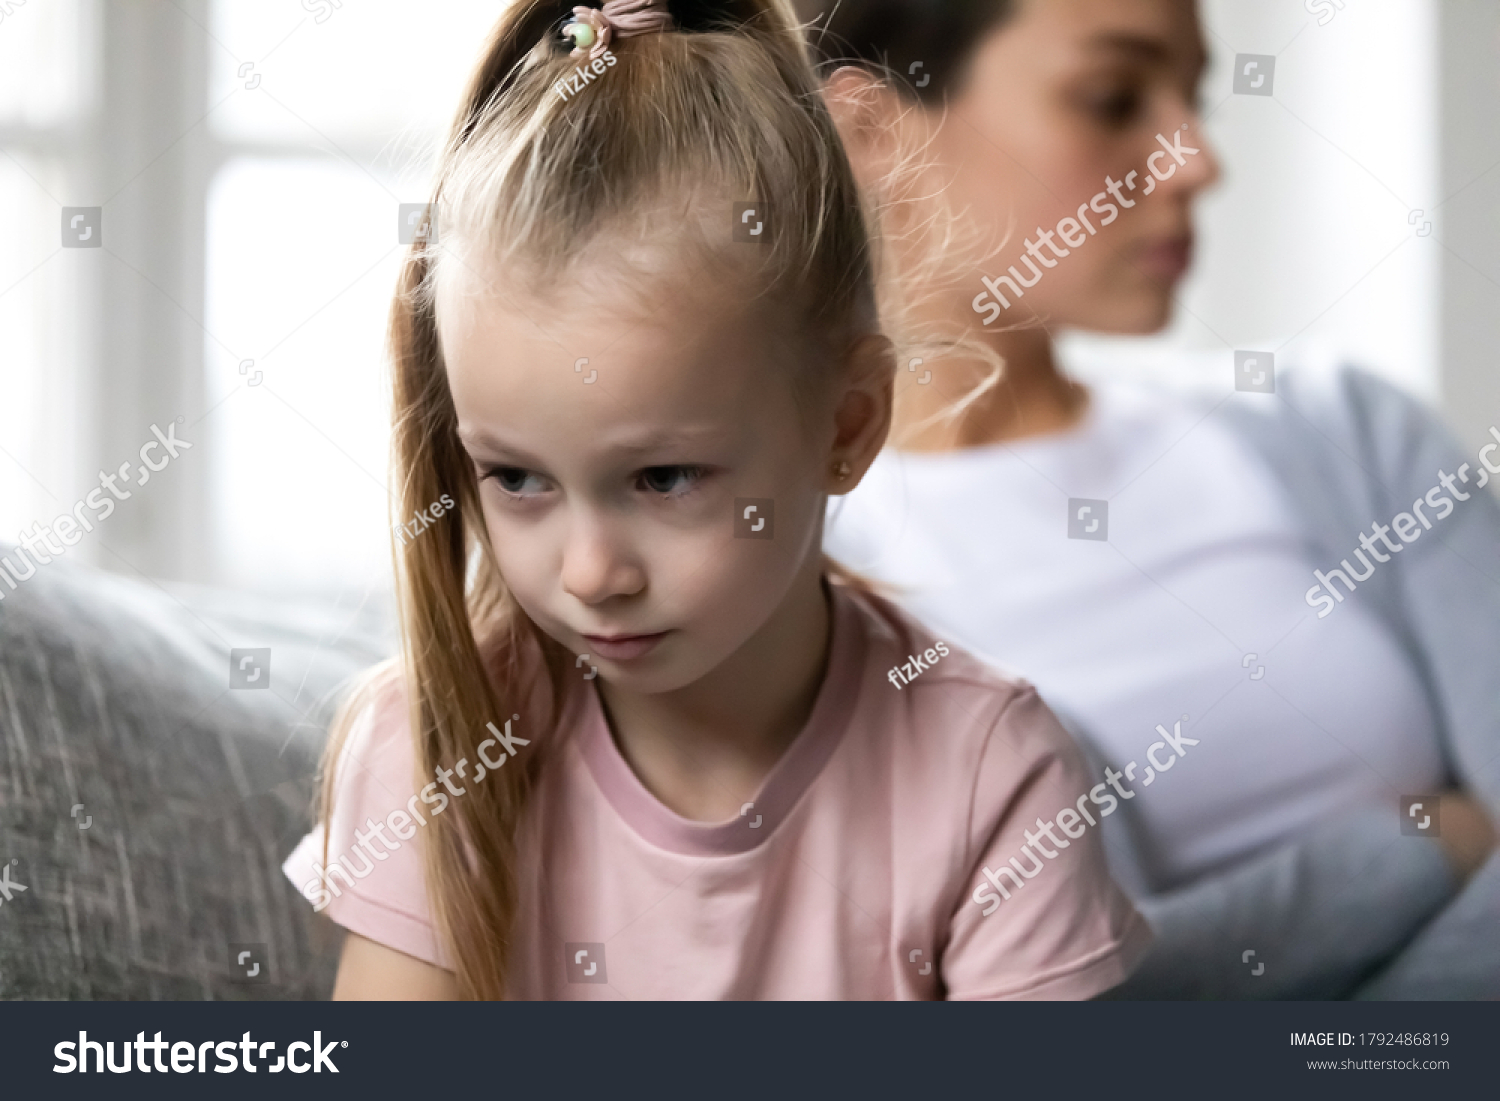 Close up head shot unhappy offended little blonde child girl turning away from upset mother, feeling stressed after quarrel or misunderstanding, family conflict, different generations gap concept. #1792486819